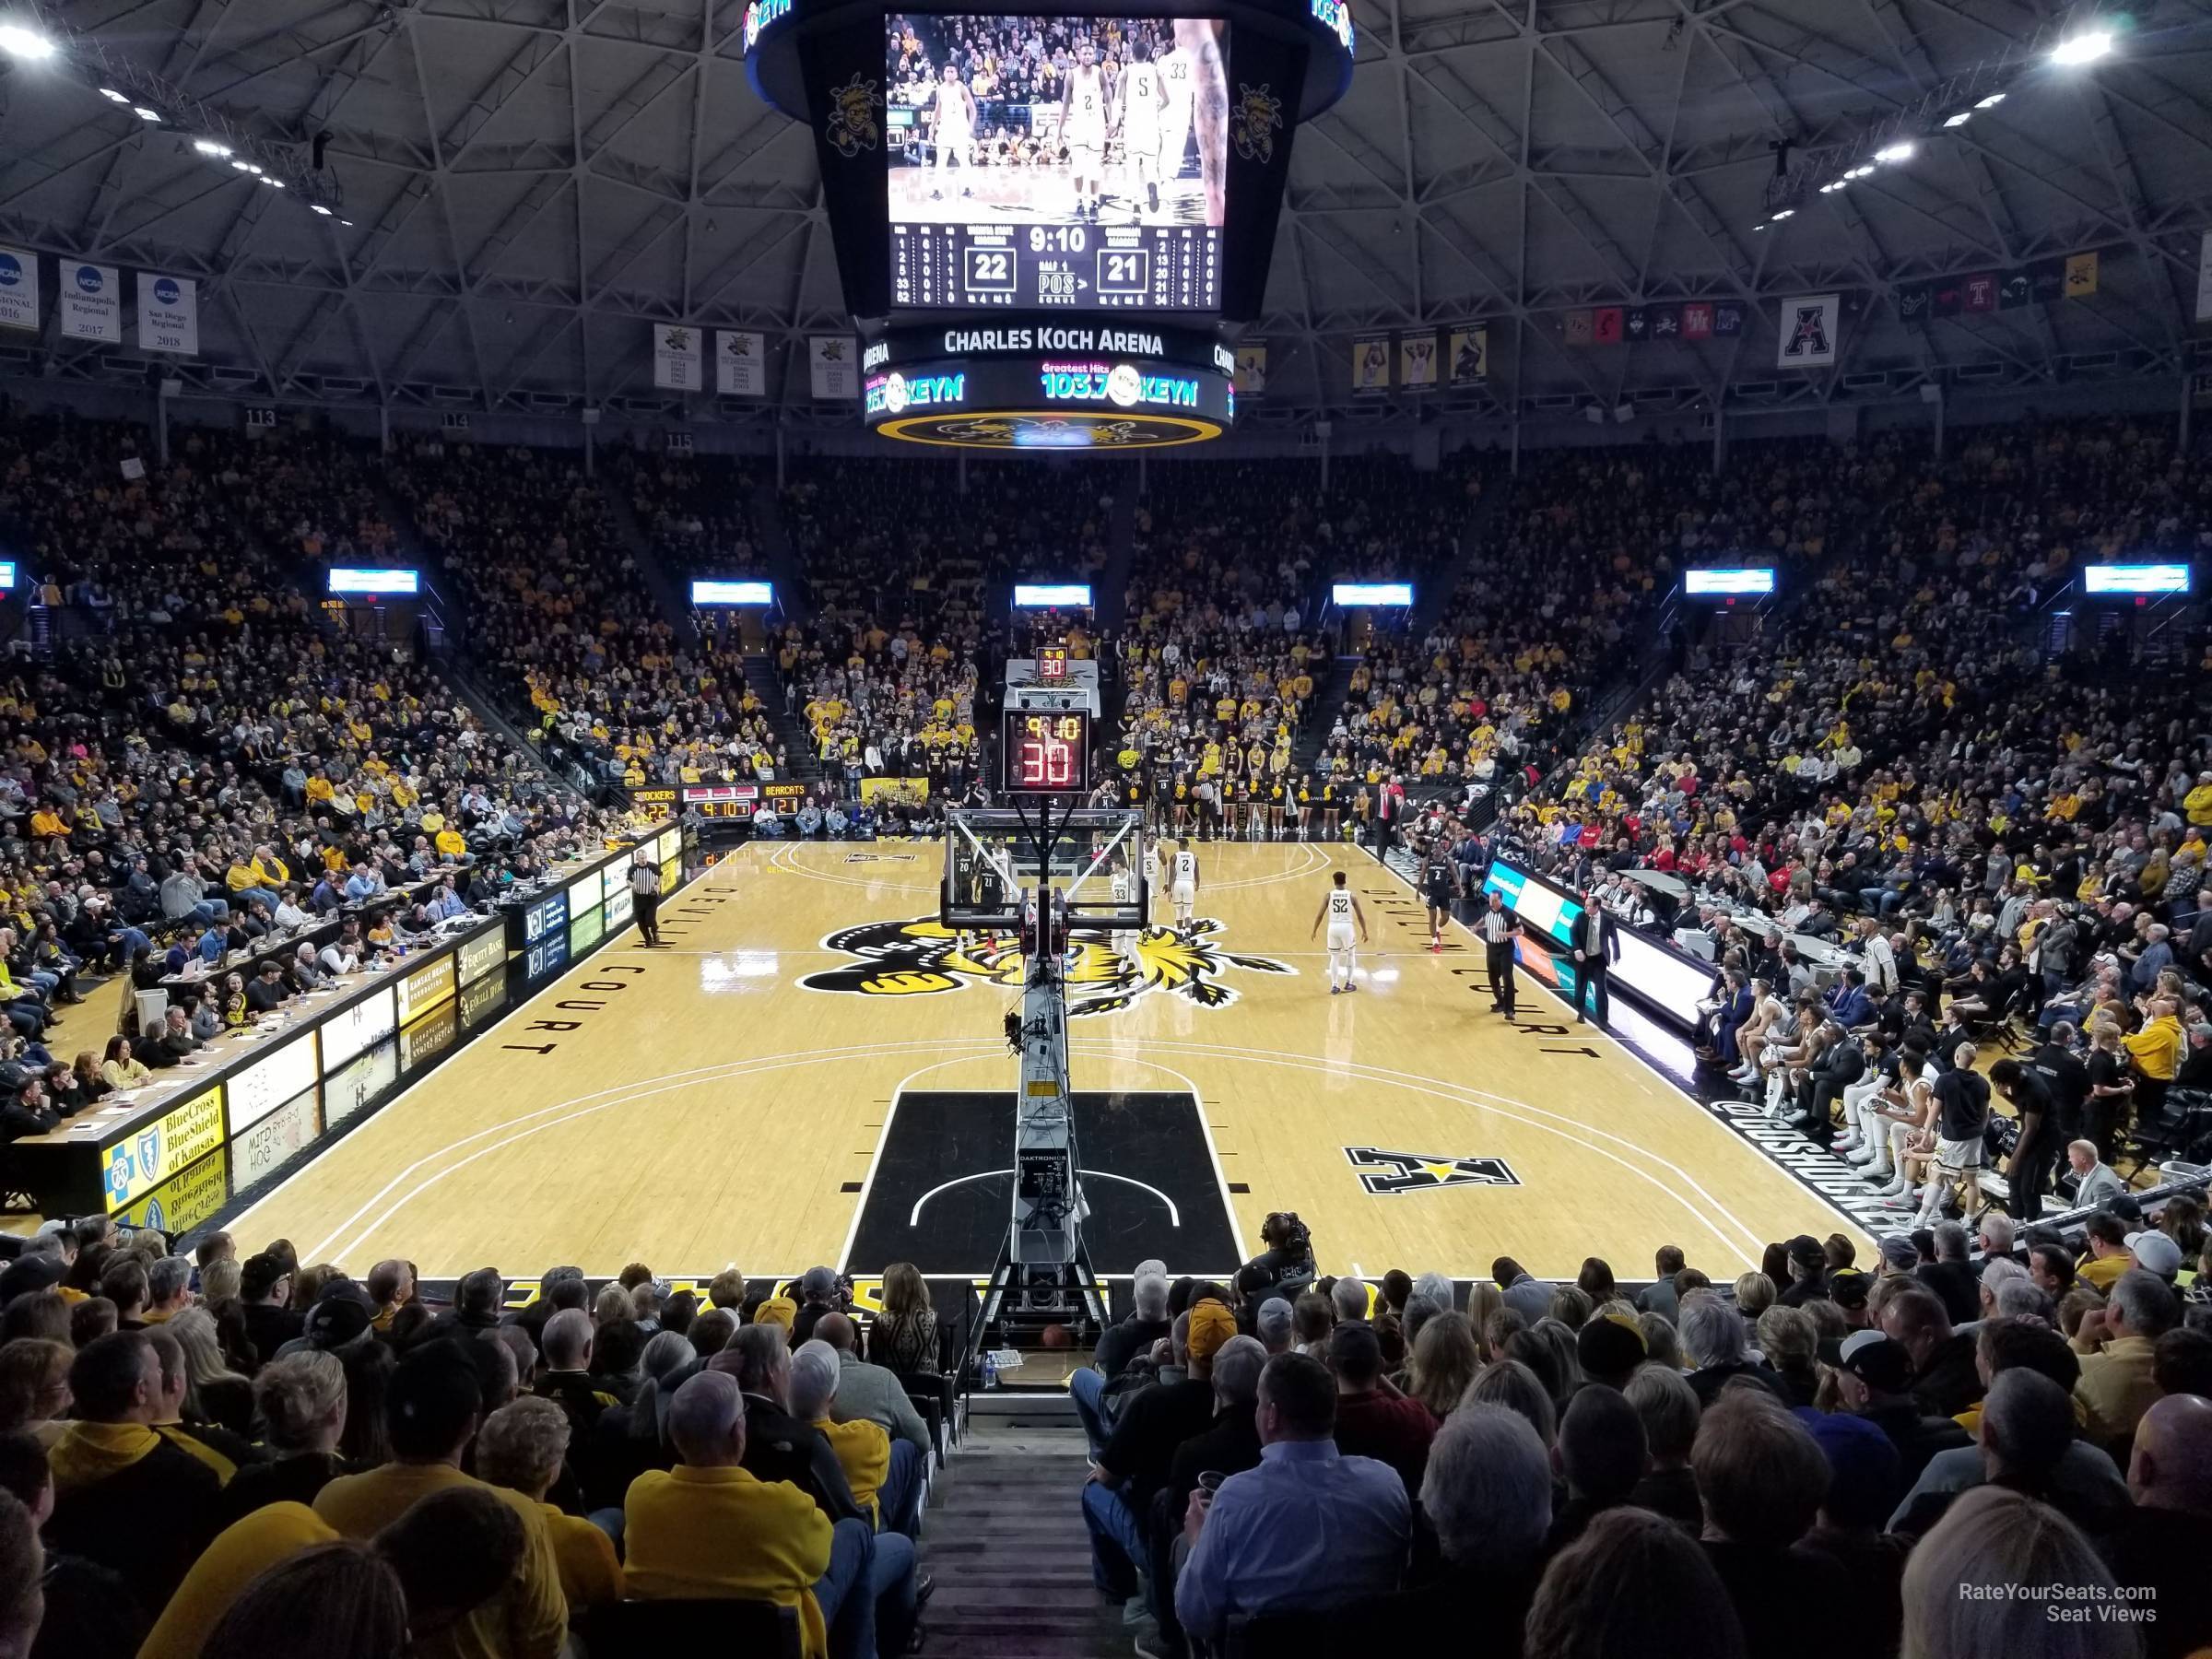 section 125, row 16 seat view  - charles koch arena